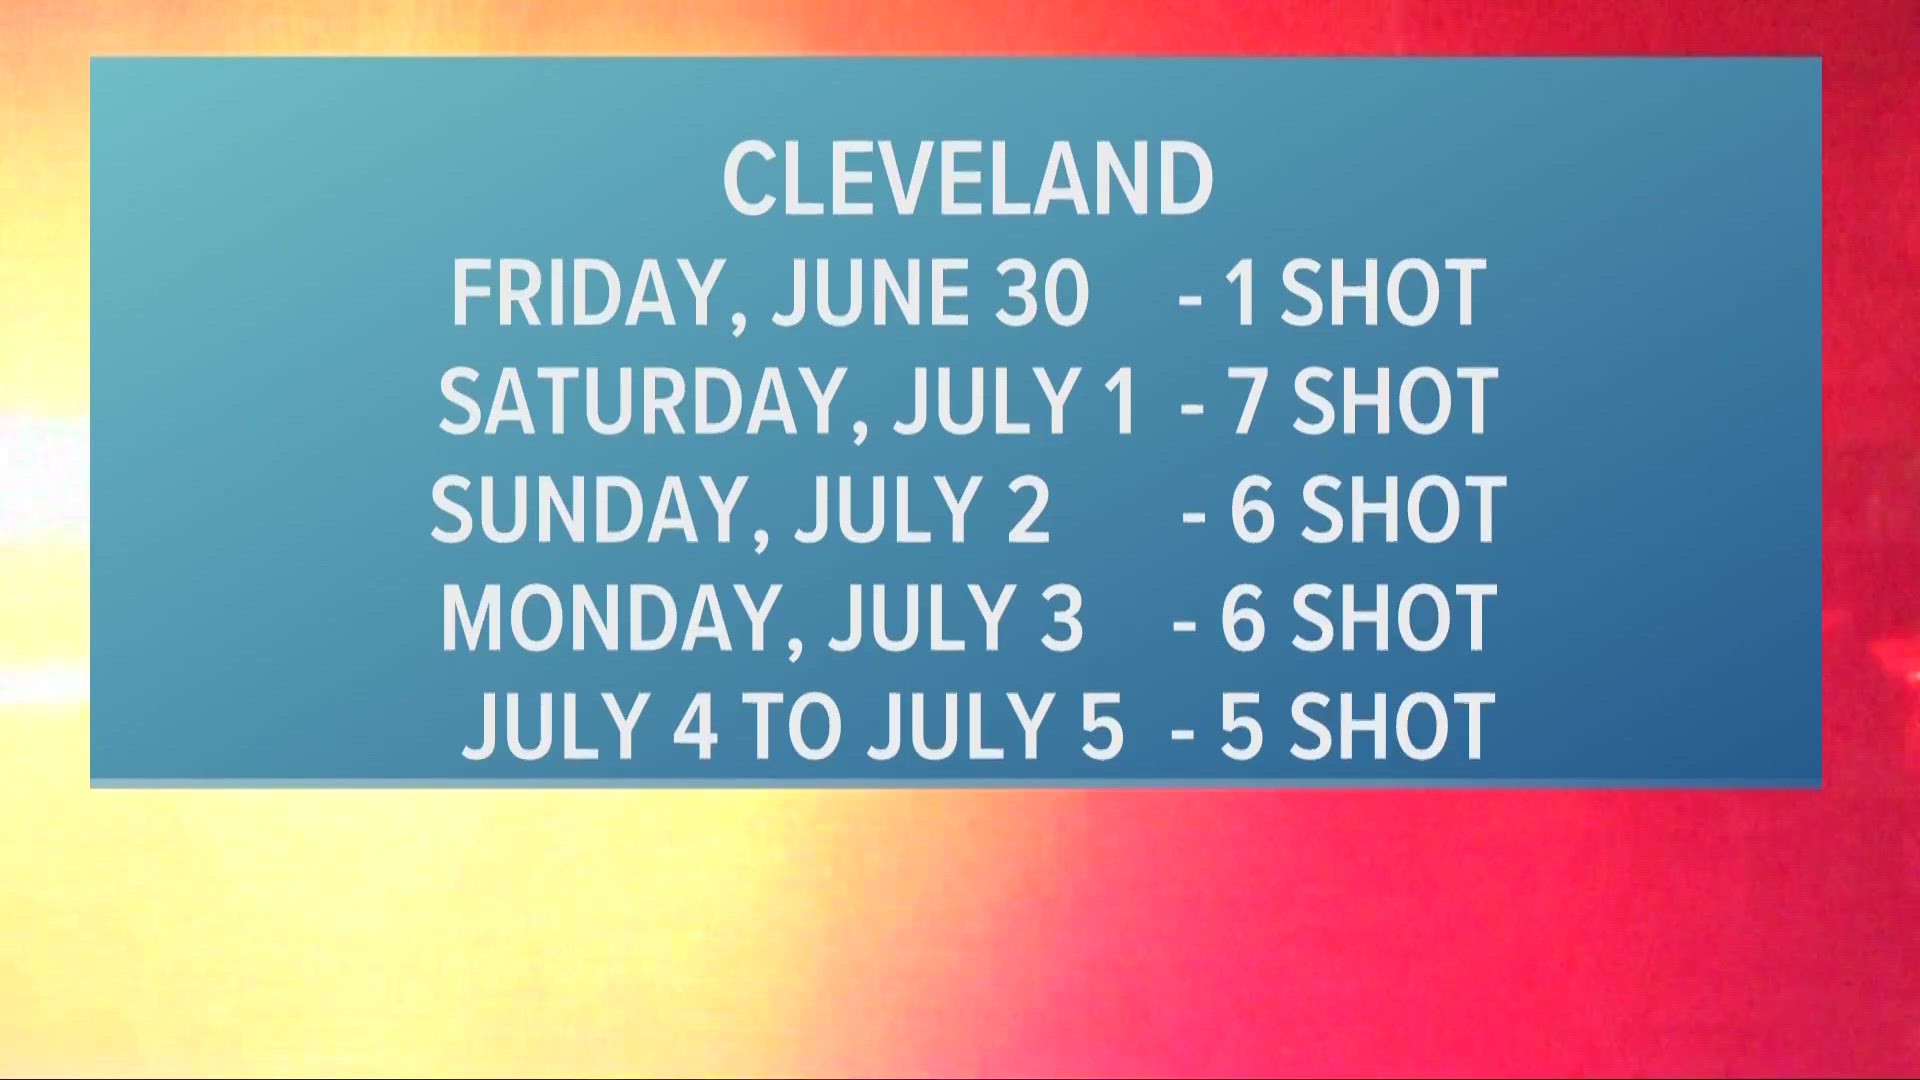 In Cleveland alone, 25 people were shot from Friday through Tuesday night. Five of those victims died.